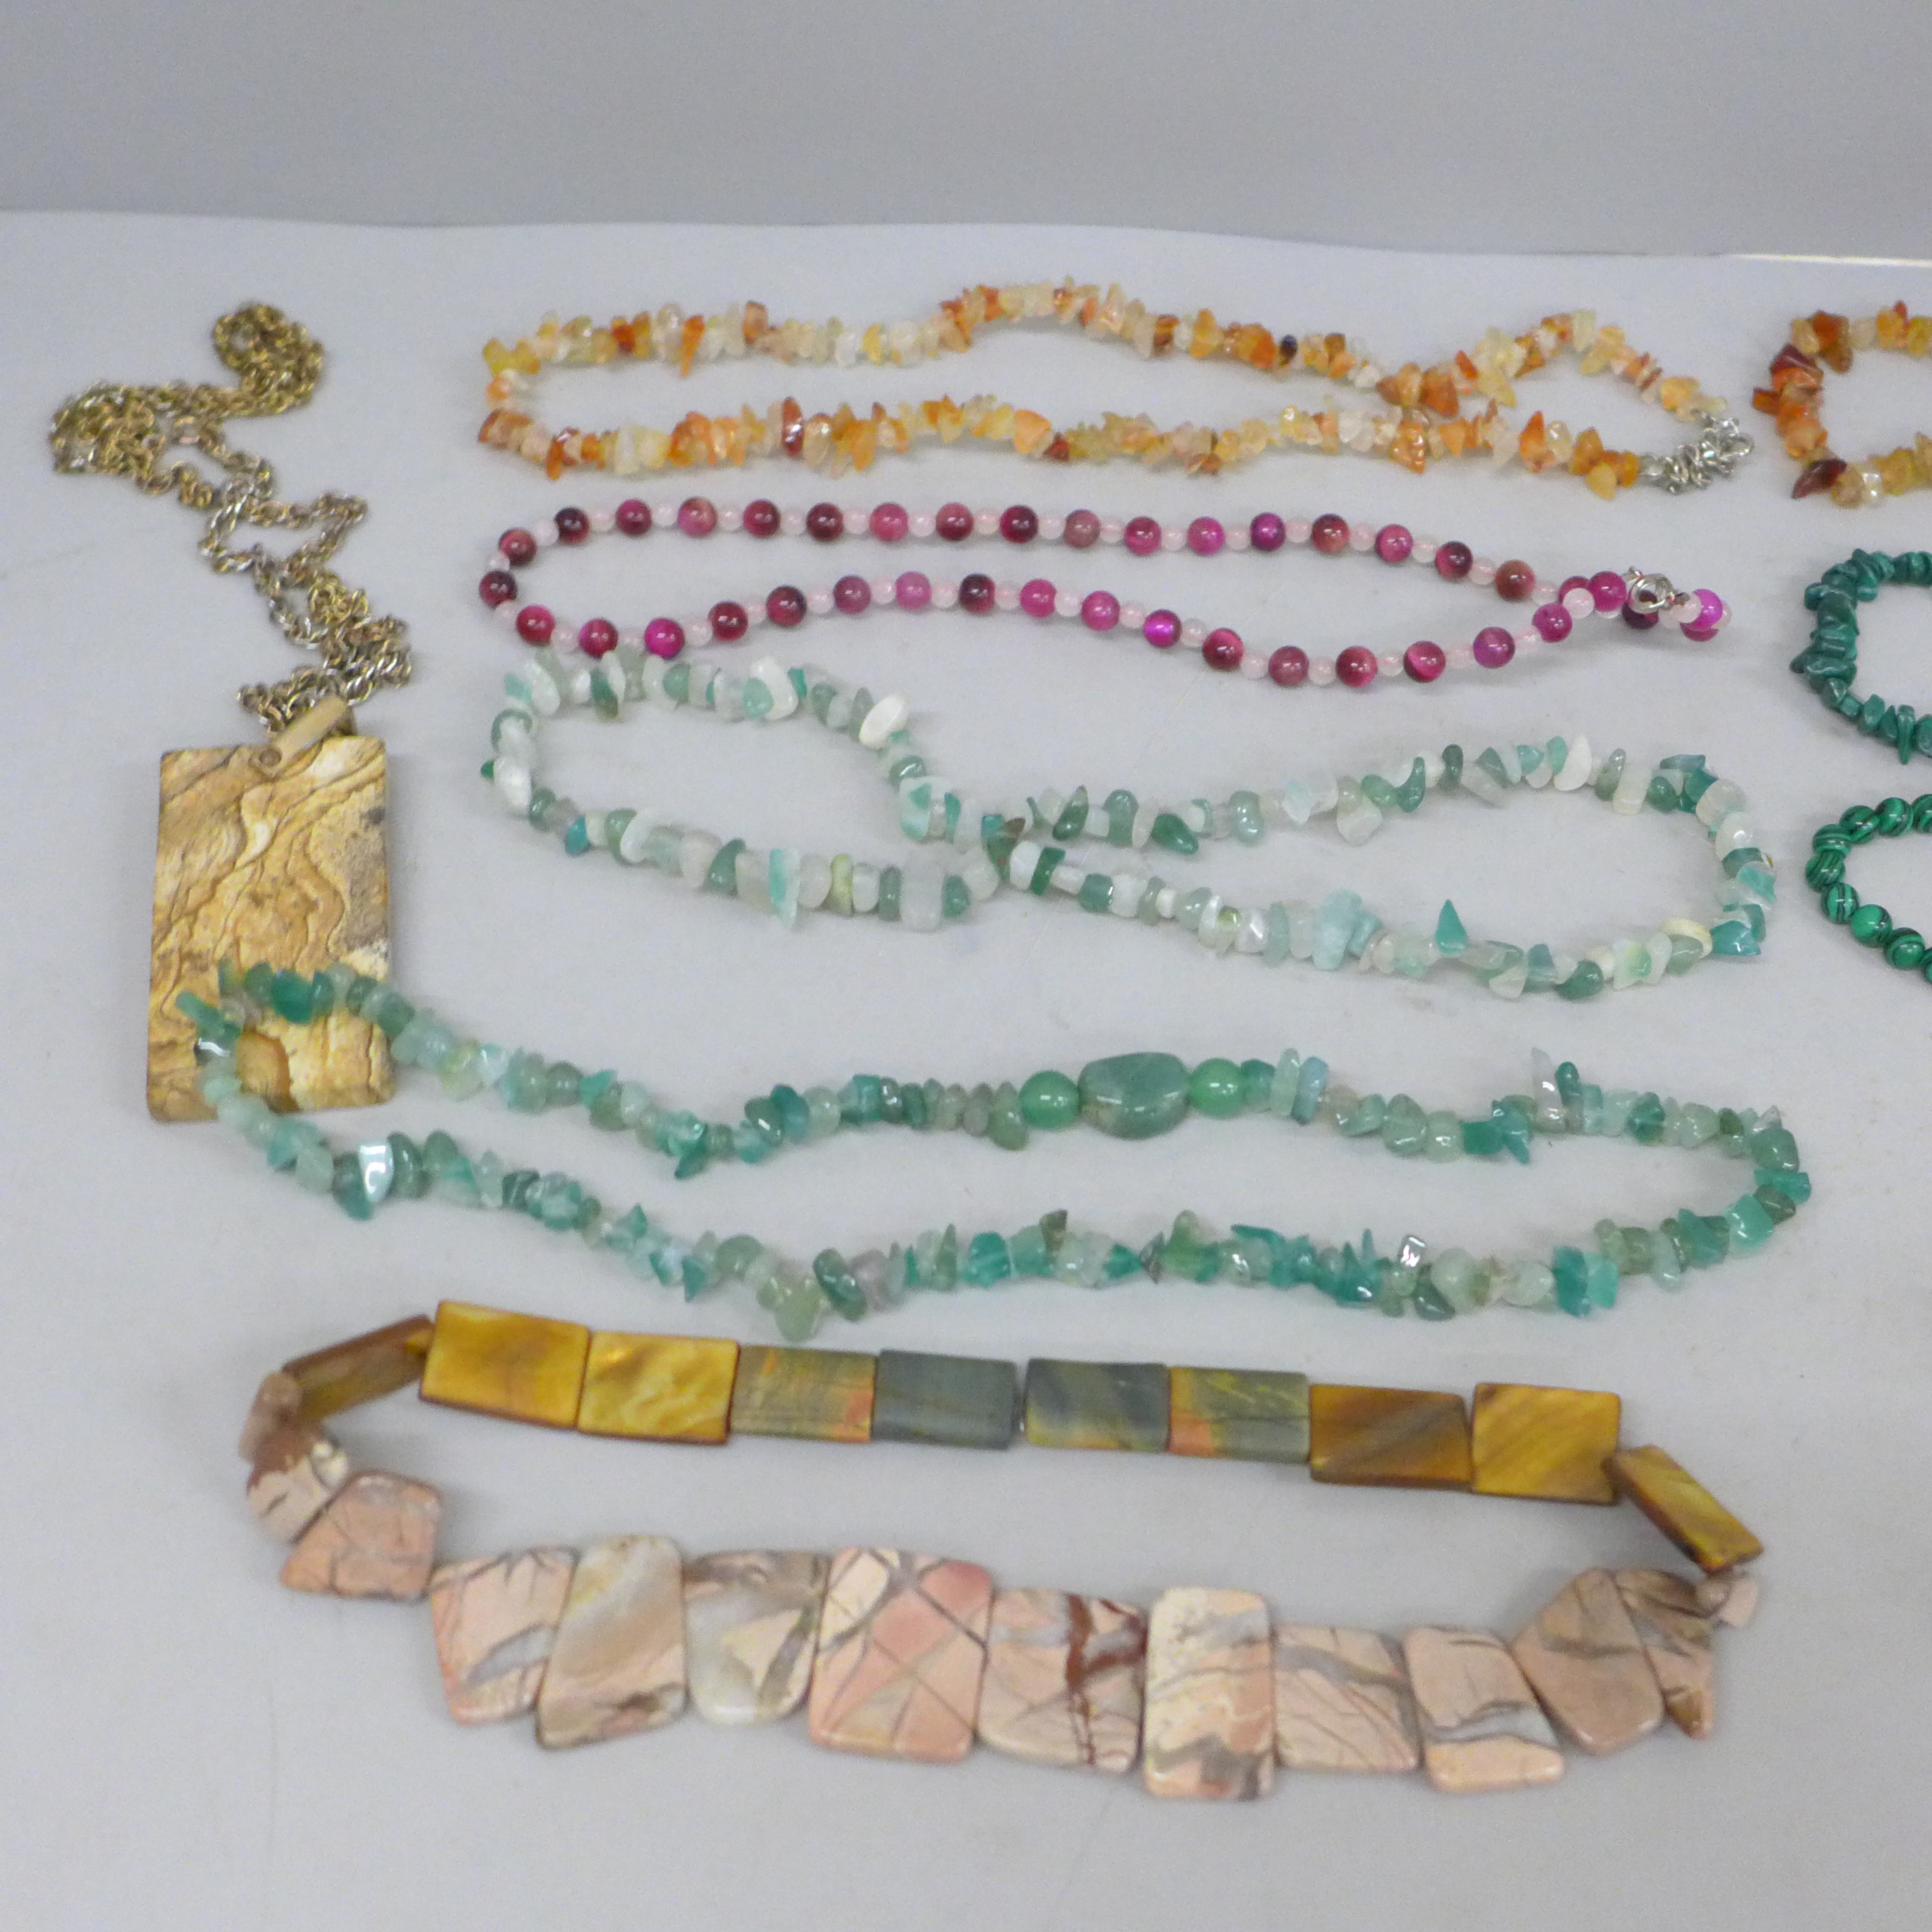 Malachite and semi precious stone necklaces and a large agate pendant and chain - Image 2 of 3